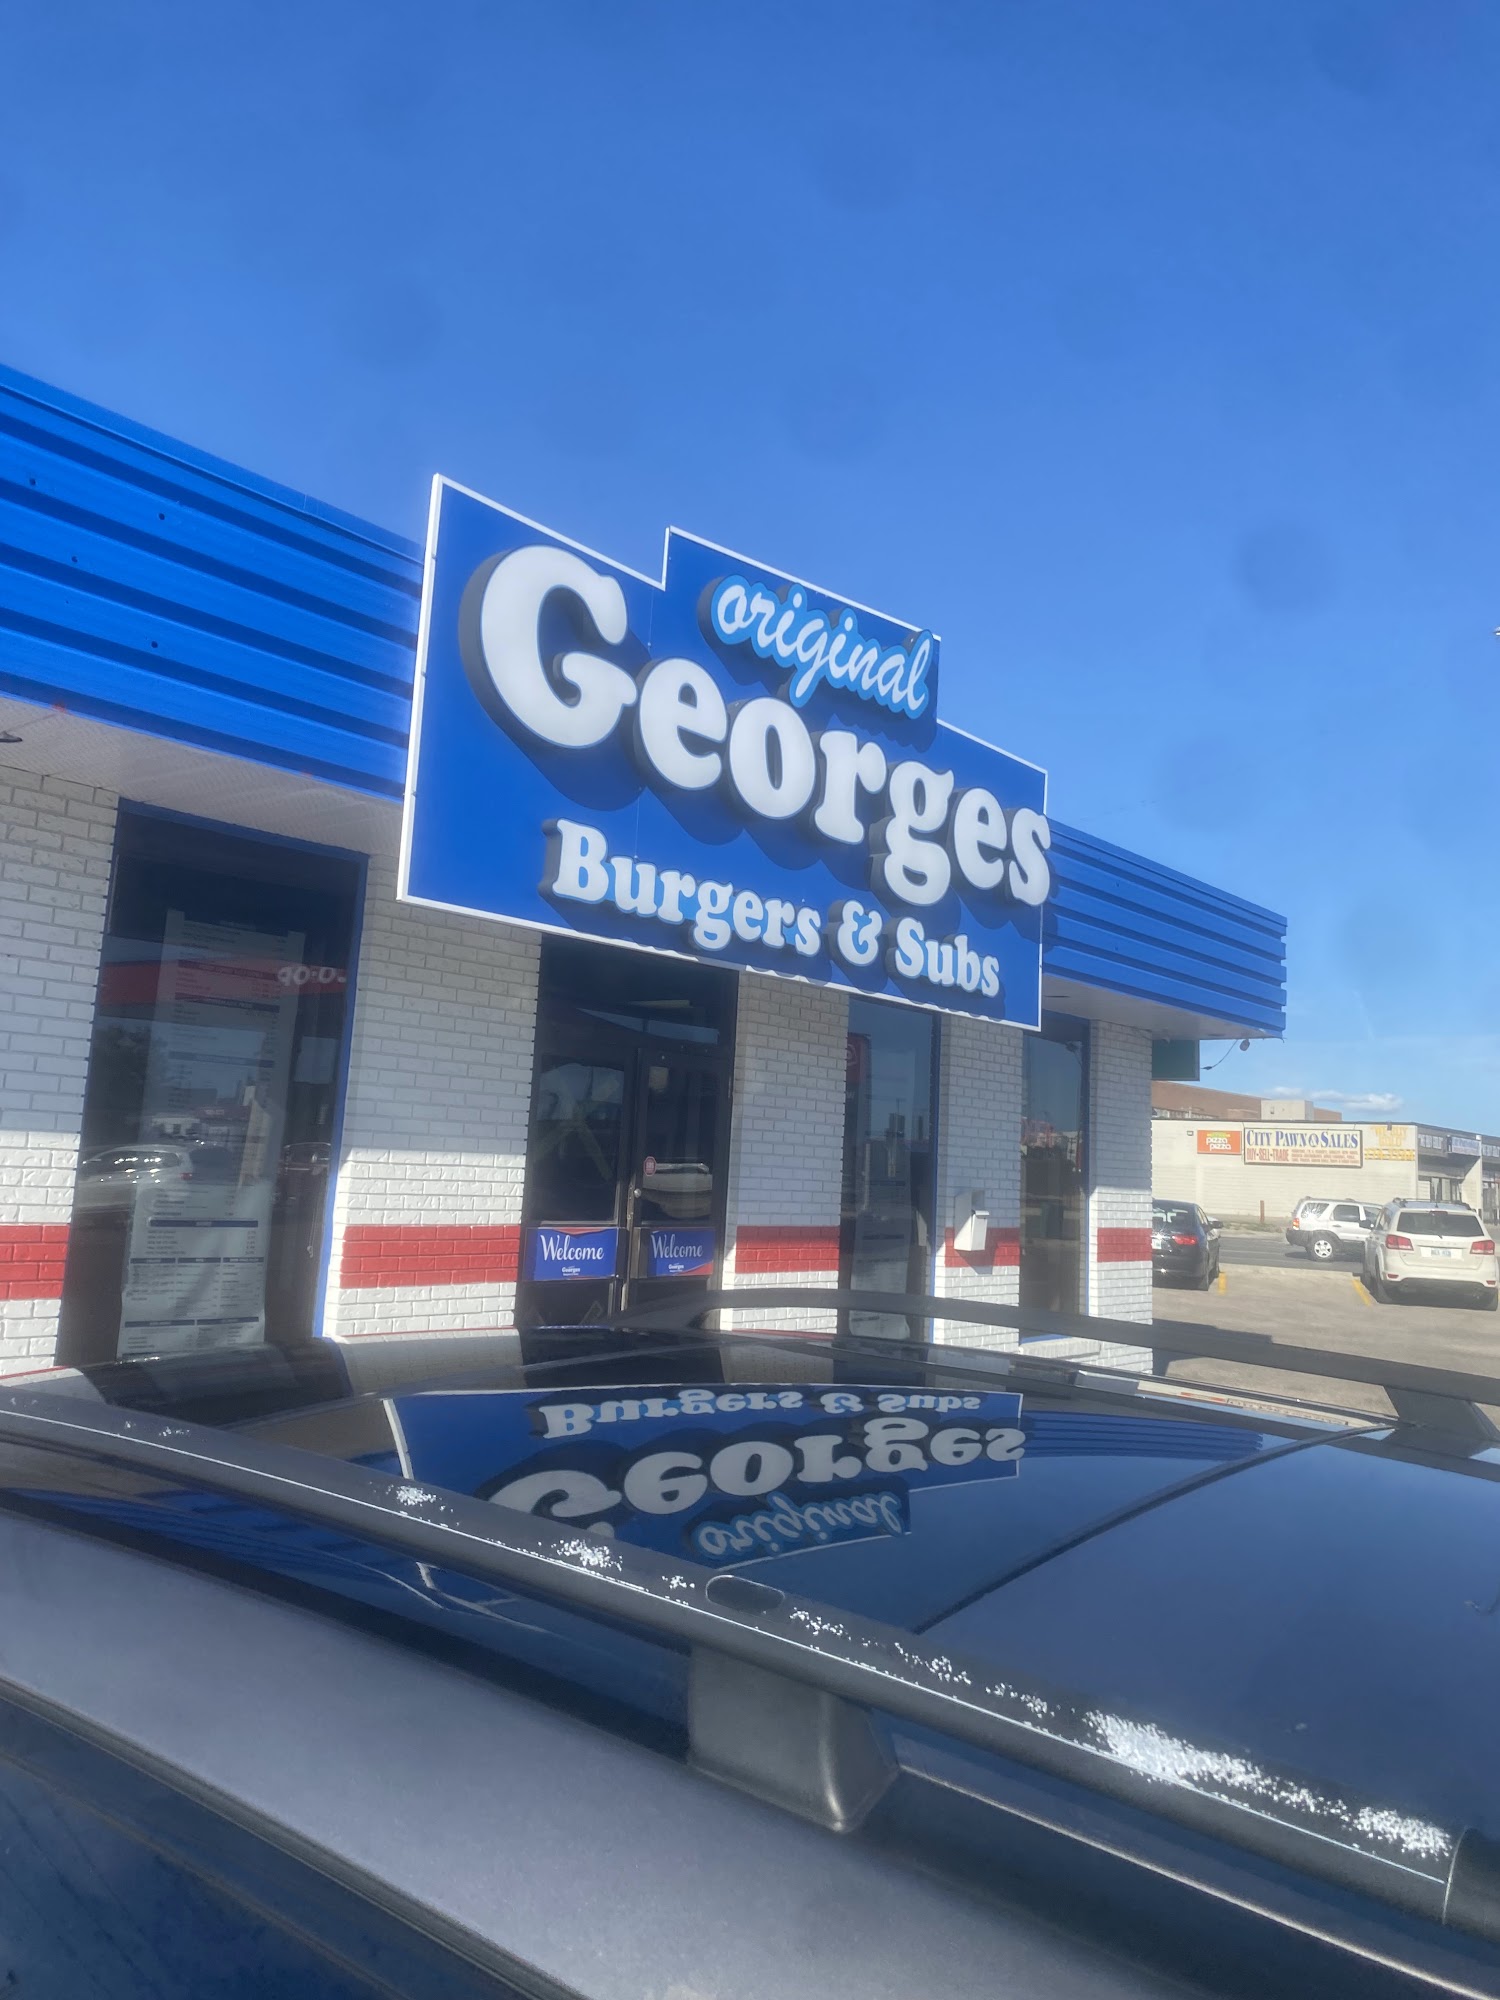 Georges burgers and subs mcphillips